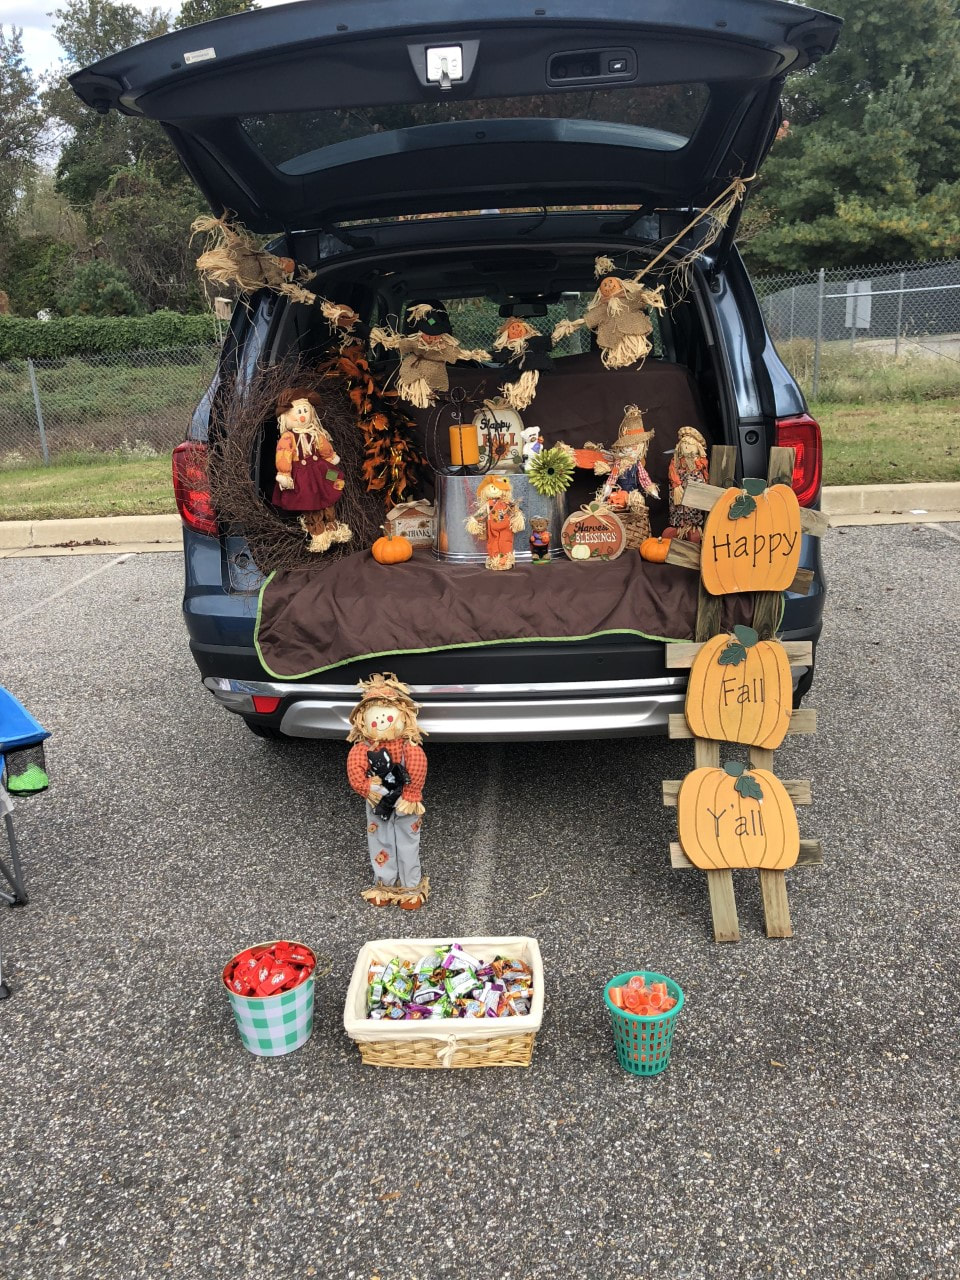 TRUNK OR TREAT - Holy Family Catholic Church in Davidsonville, MD